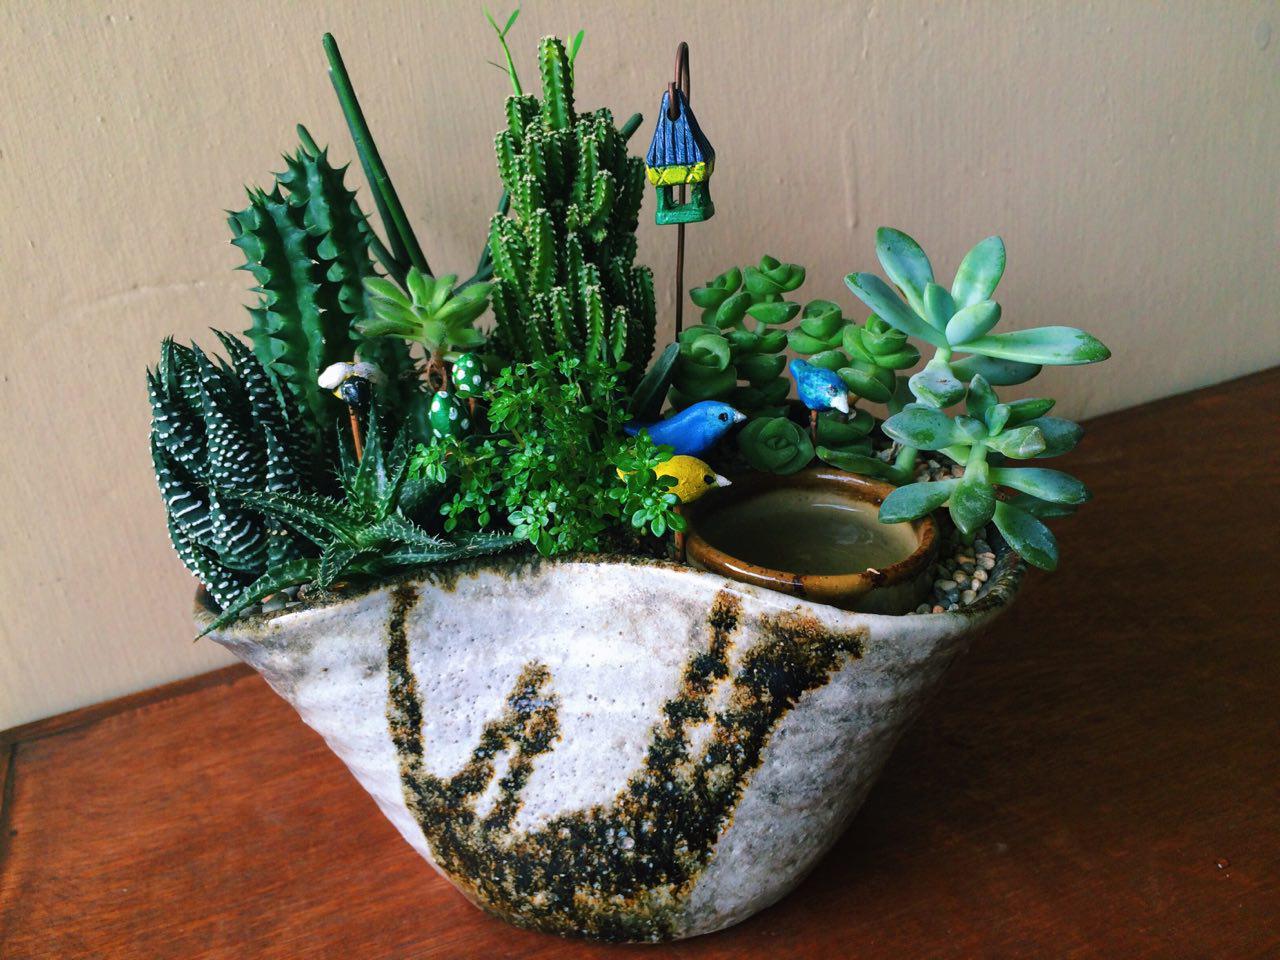 10 Tips for Beginners: How To Take Care Of Cacti and ...